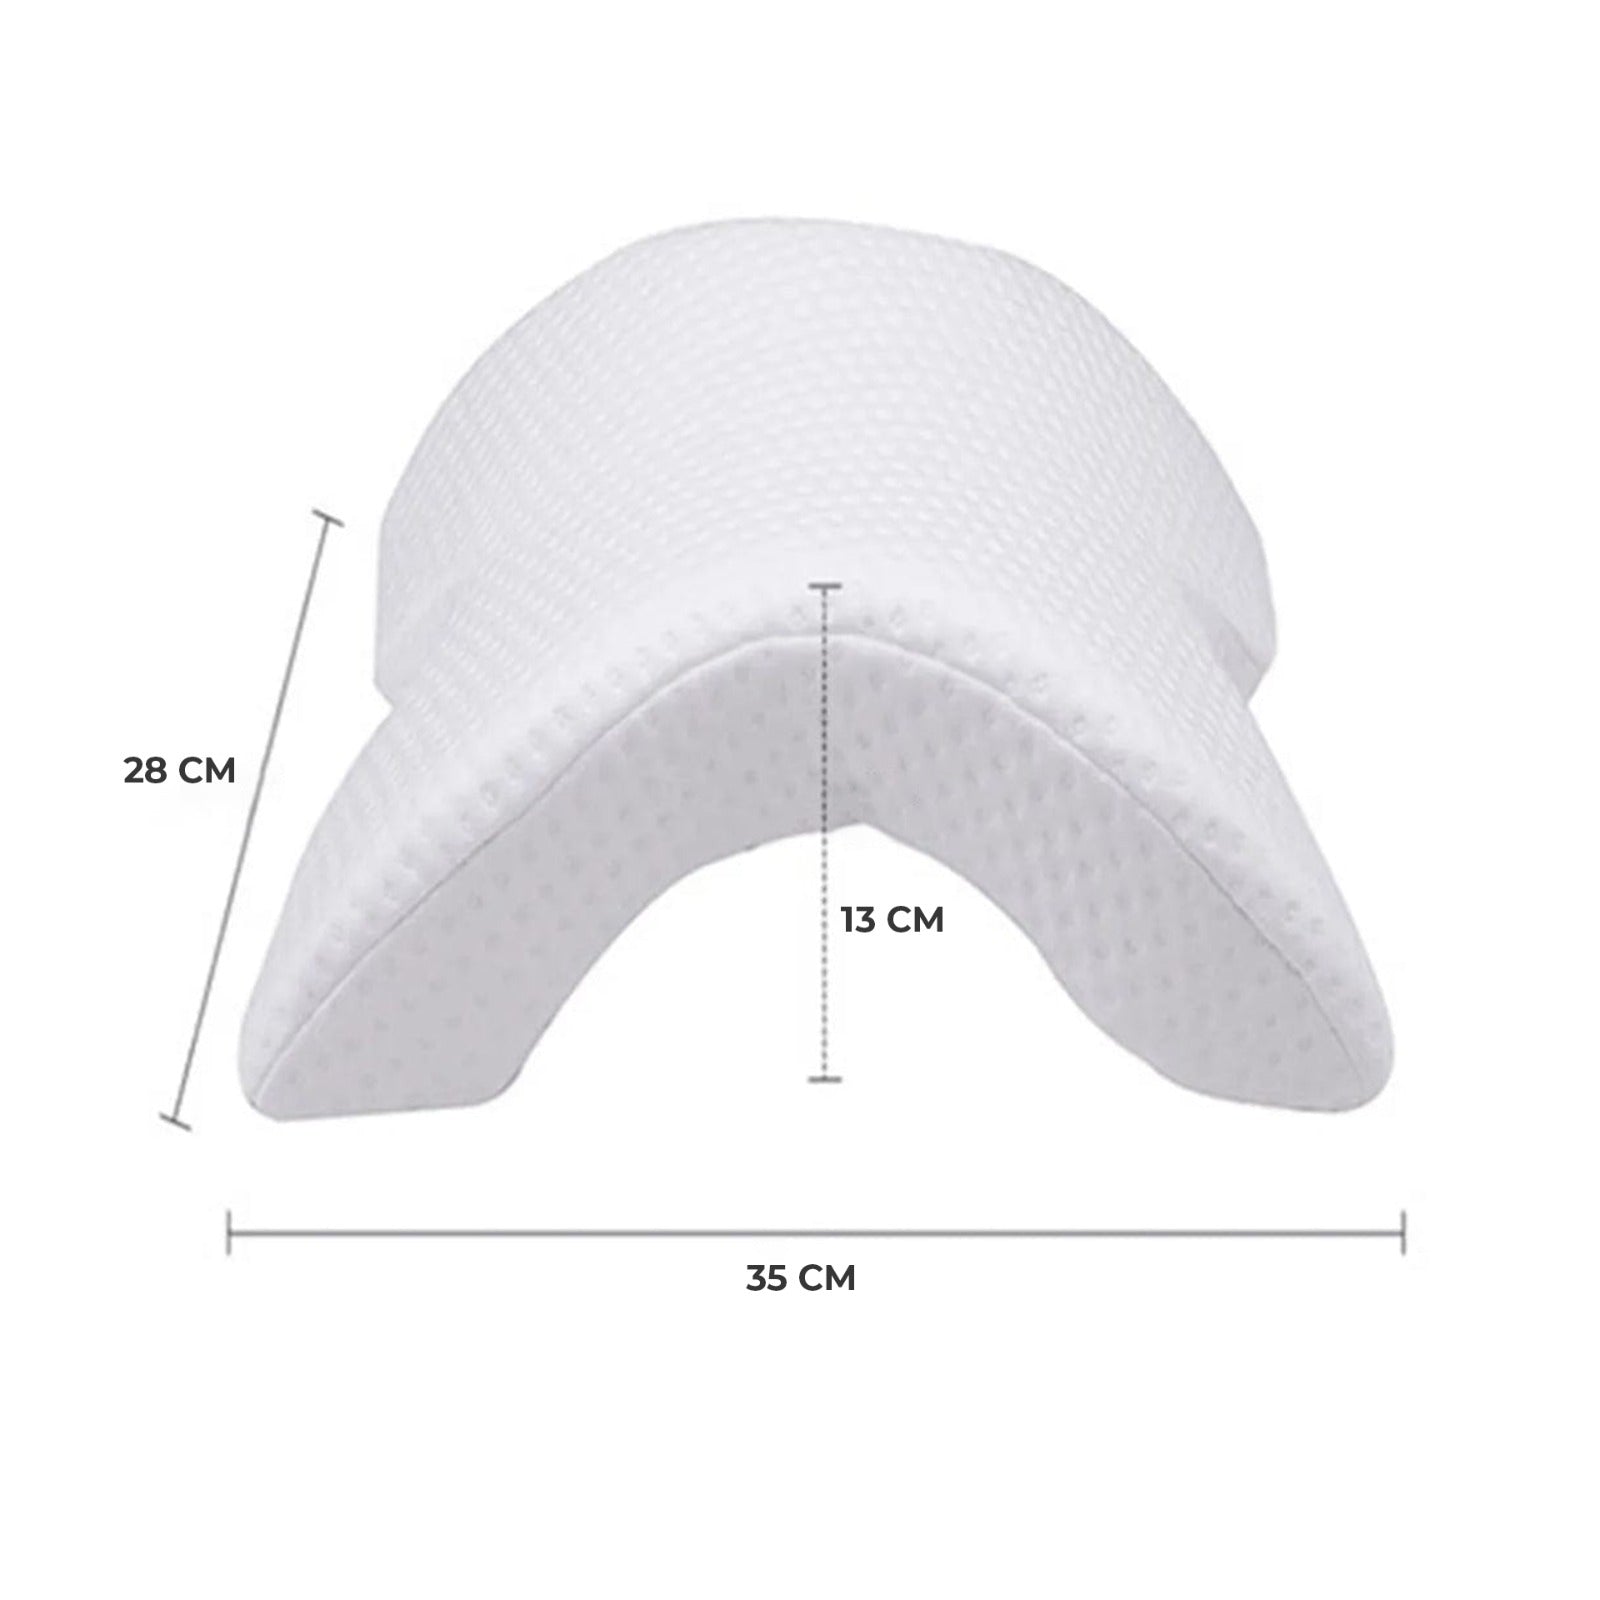 U-Shaped Curved Memory Foam Sleeping Neck Cervical Pillow with its size